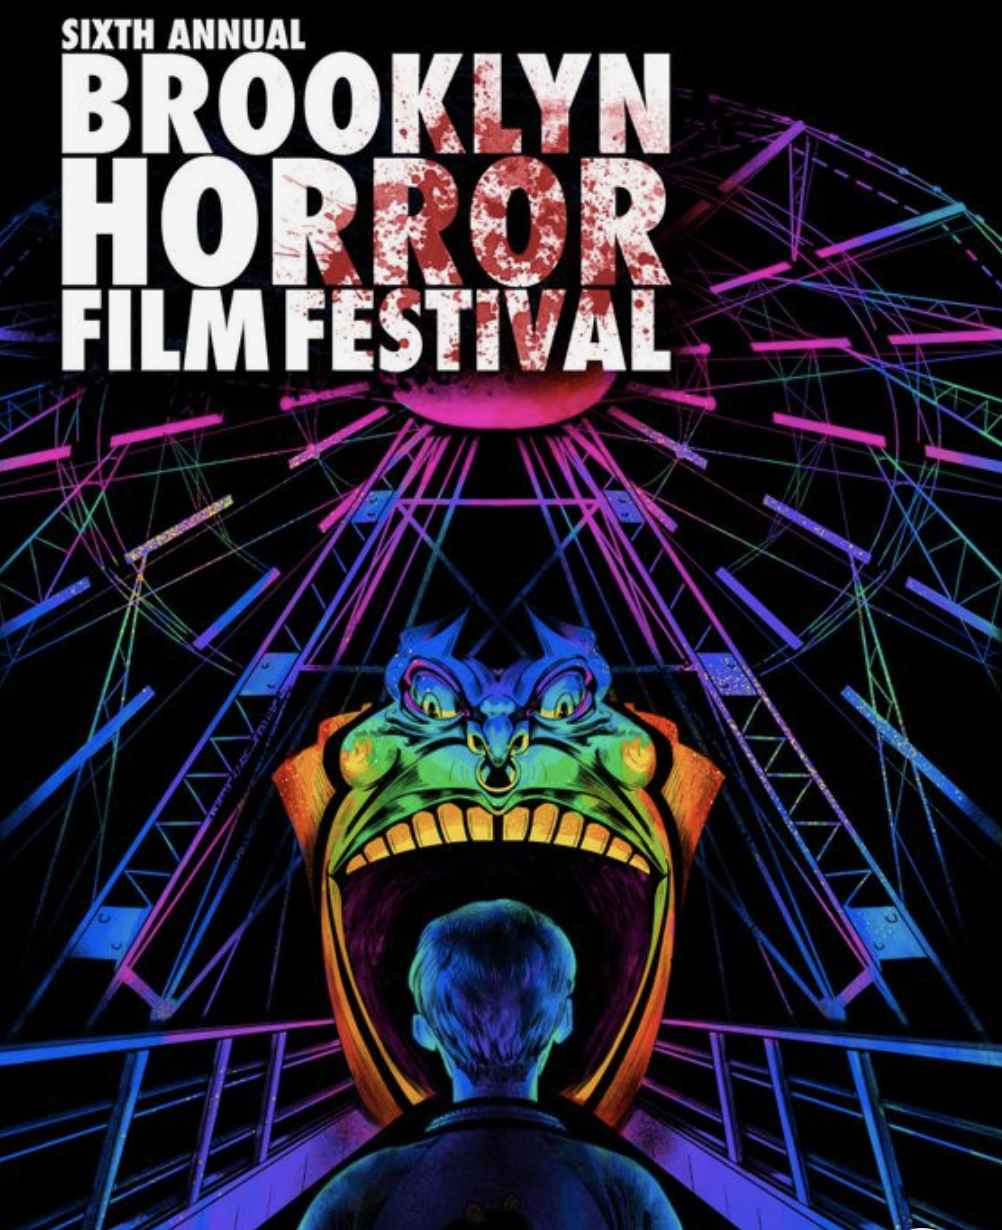 #nofilter, horror shorts, short horror movies, Nathan Crooker, horror film festivals, NYC events, NYC movies, The Cost of Living, women in horror, LGBTQ horror